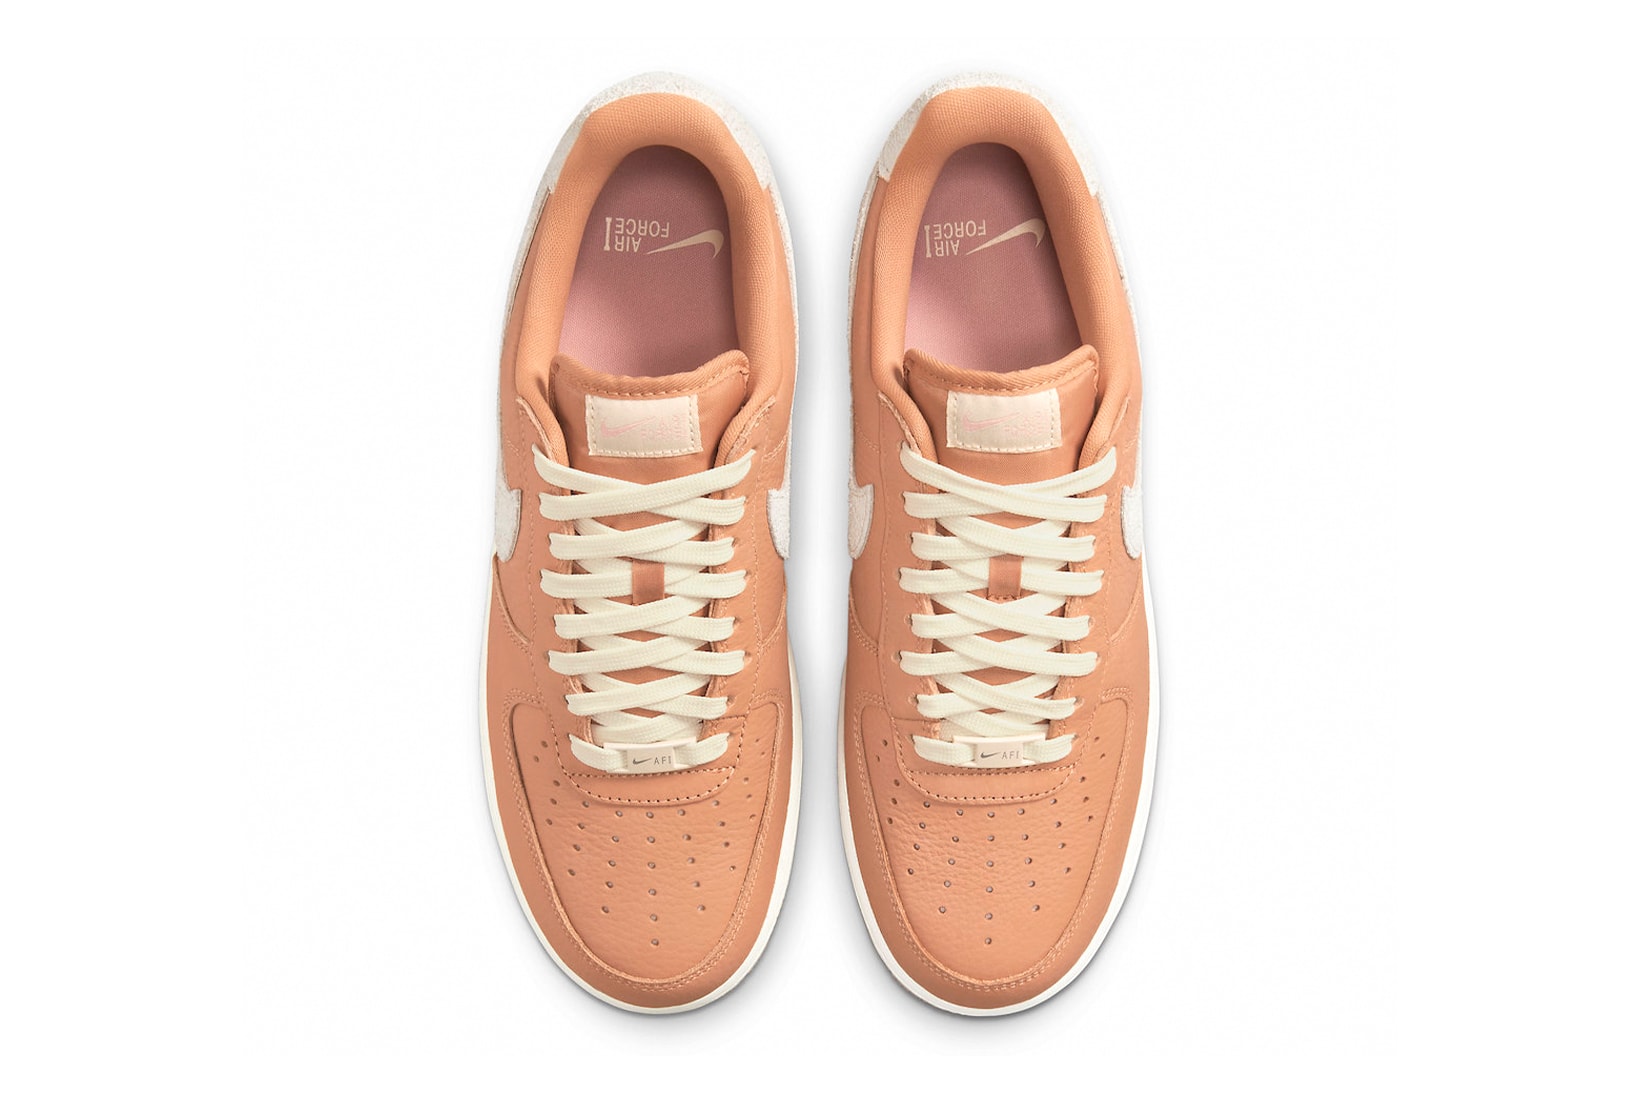 Nike Air Force 1 Craft Sneakers Beige Gum Price Release Date Insole Details